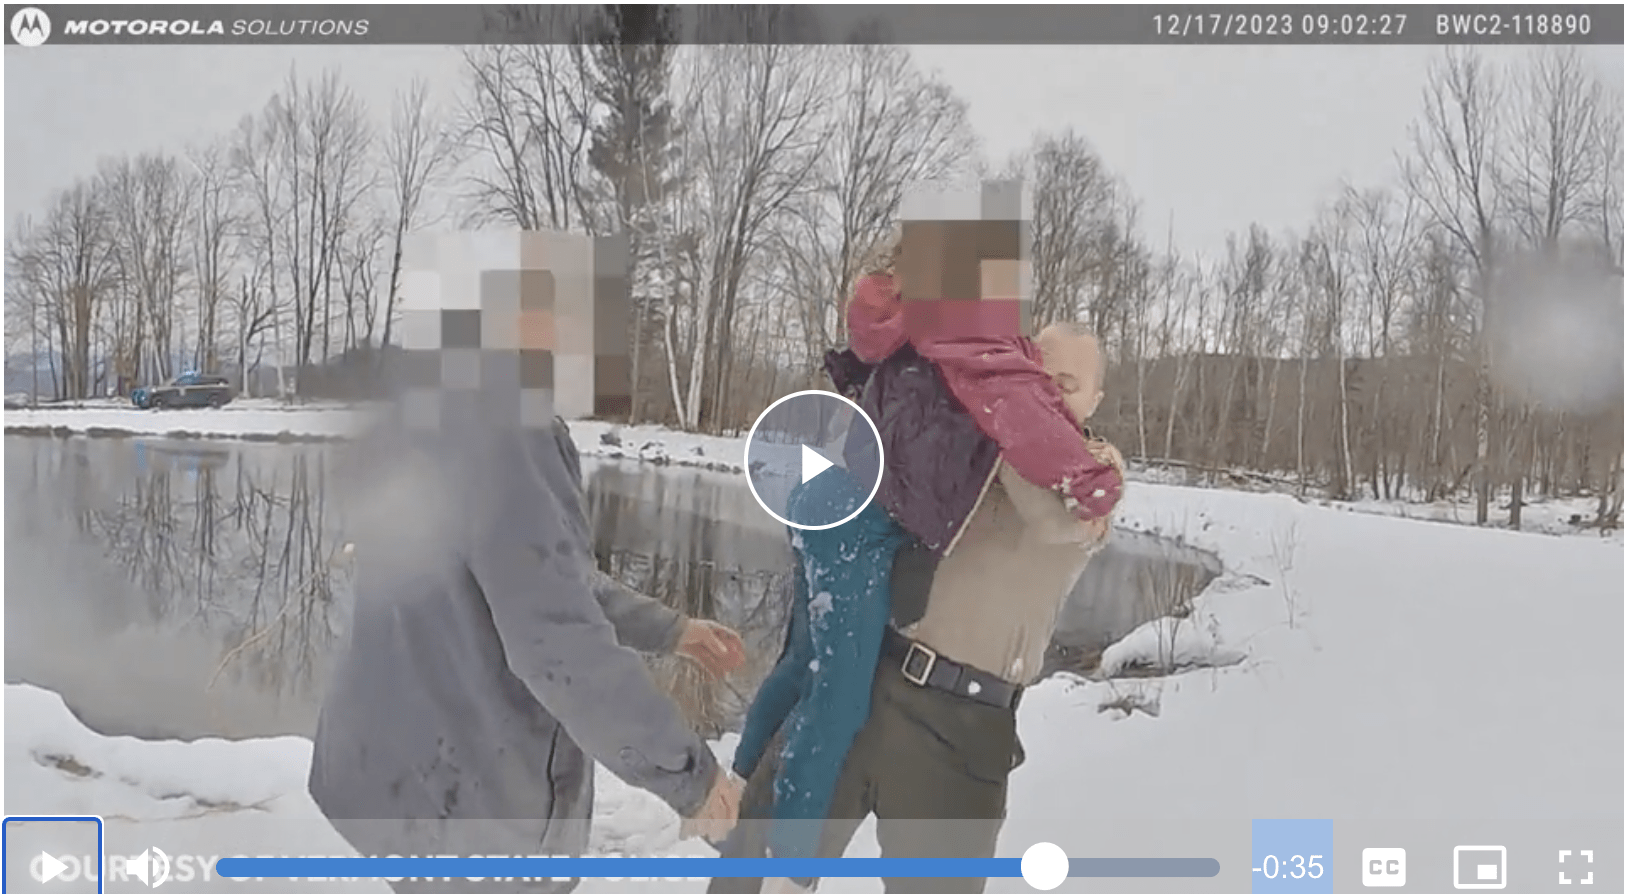 An incredible live-saving rescue was caught on police body cam video after a Vermont State Trooper dove into an icy pond to save a young girl.